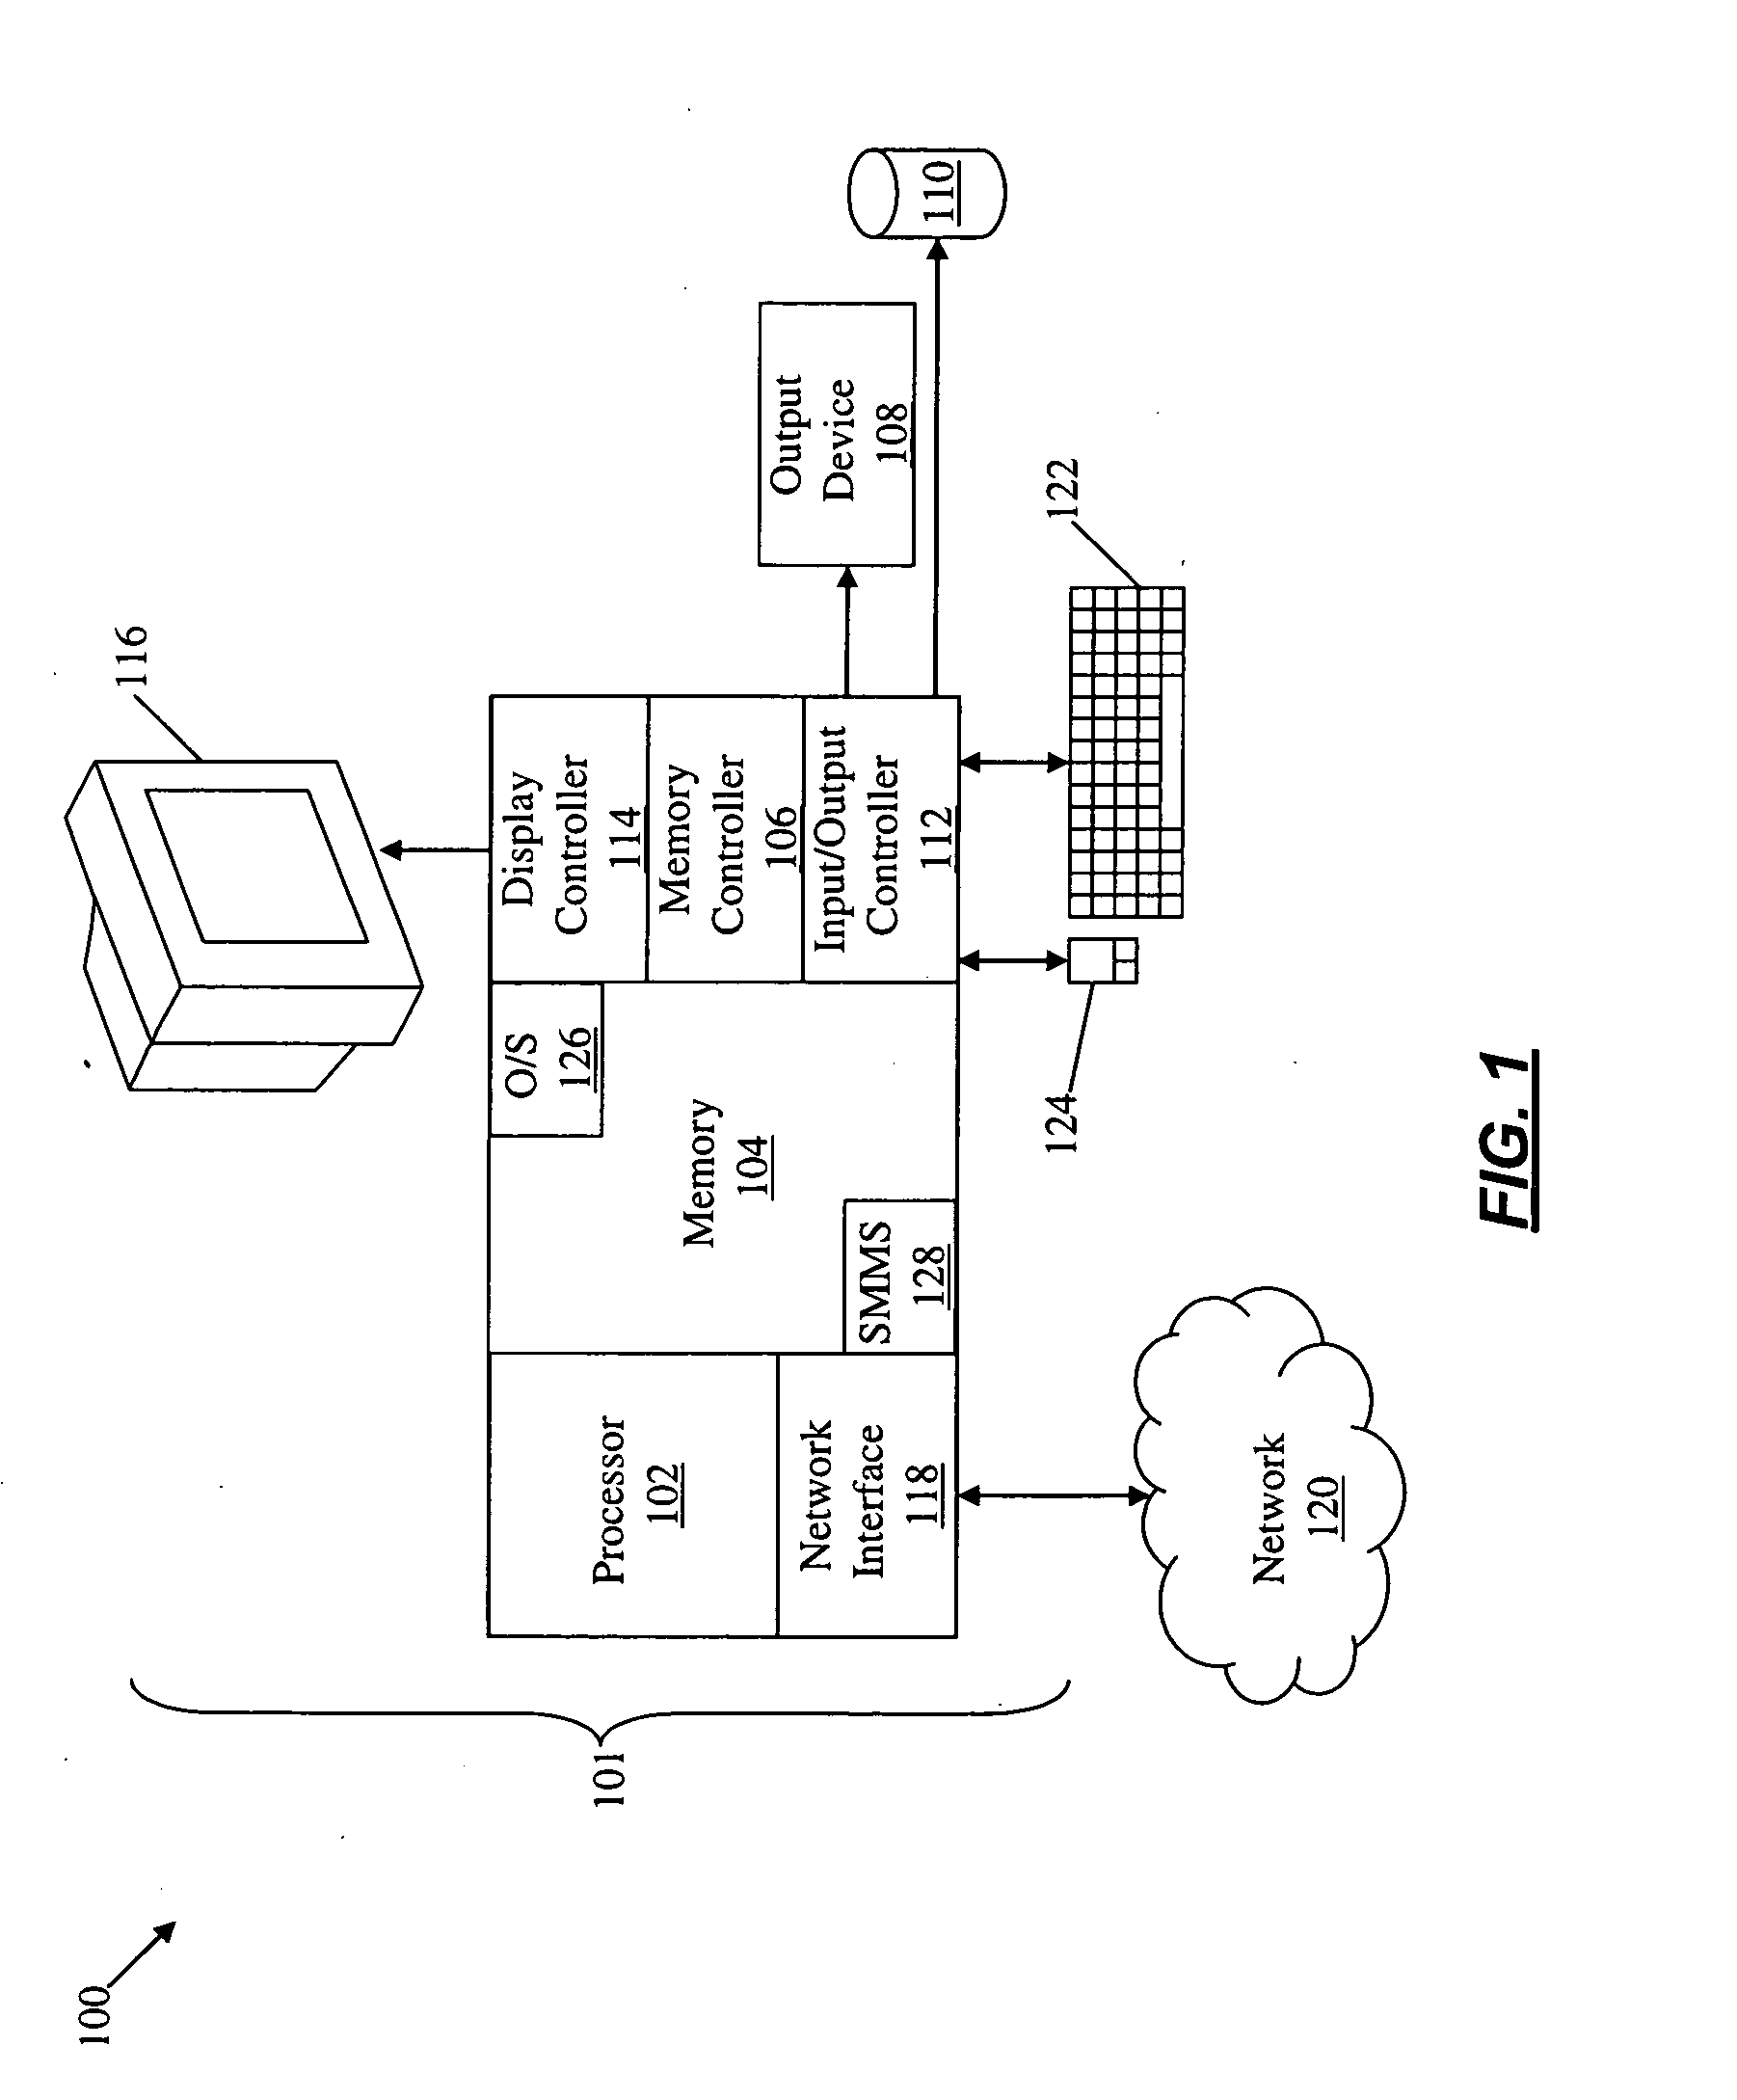 Method of Merging and Incremantal Construction of Minimal Finite State Machines